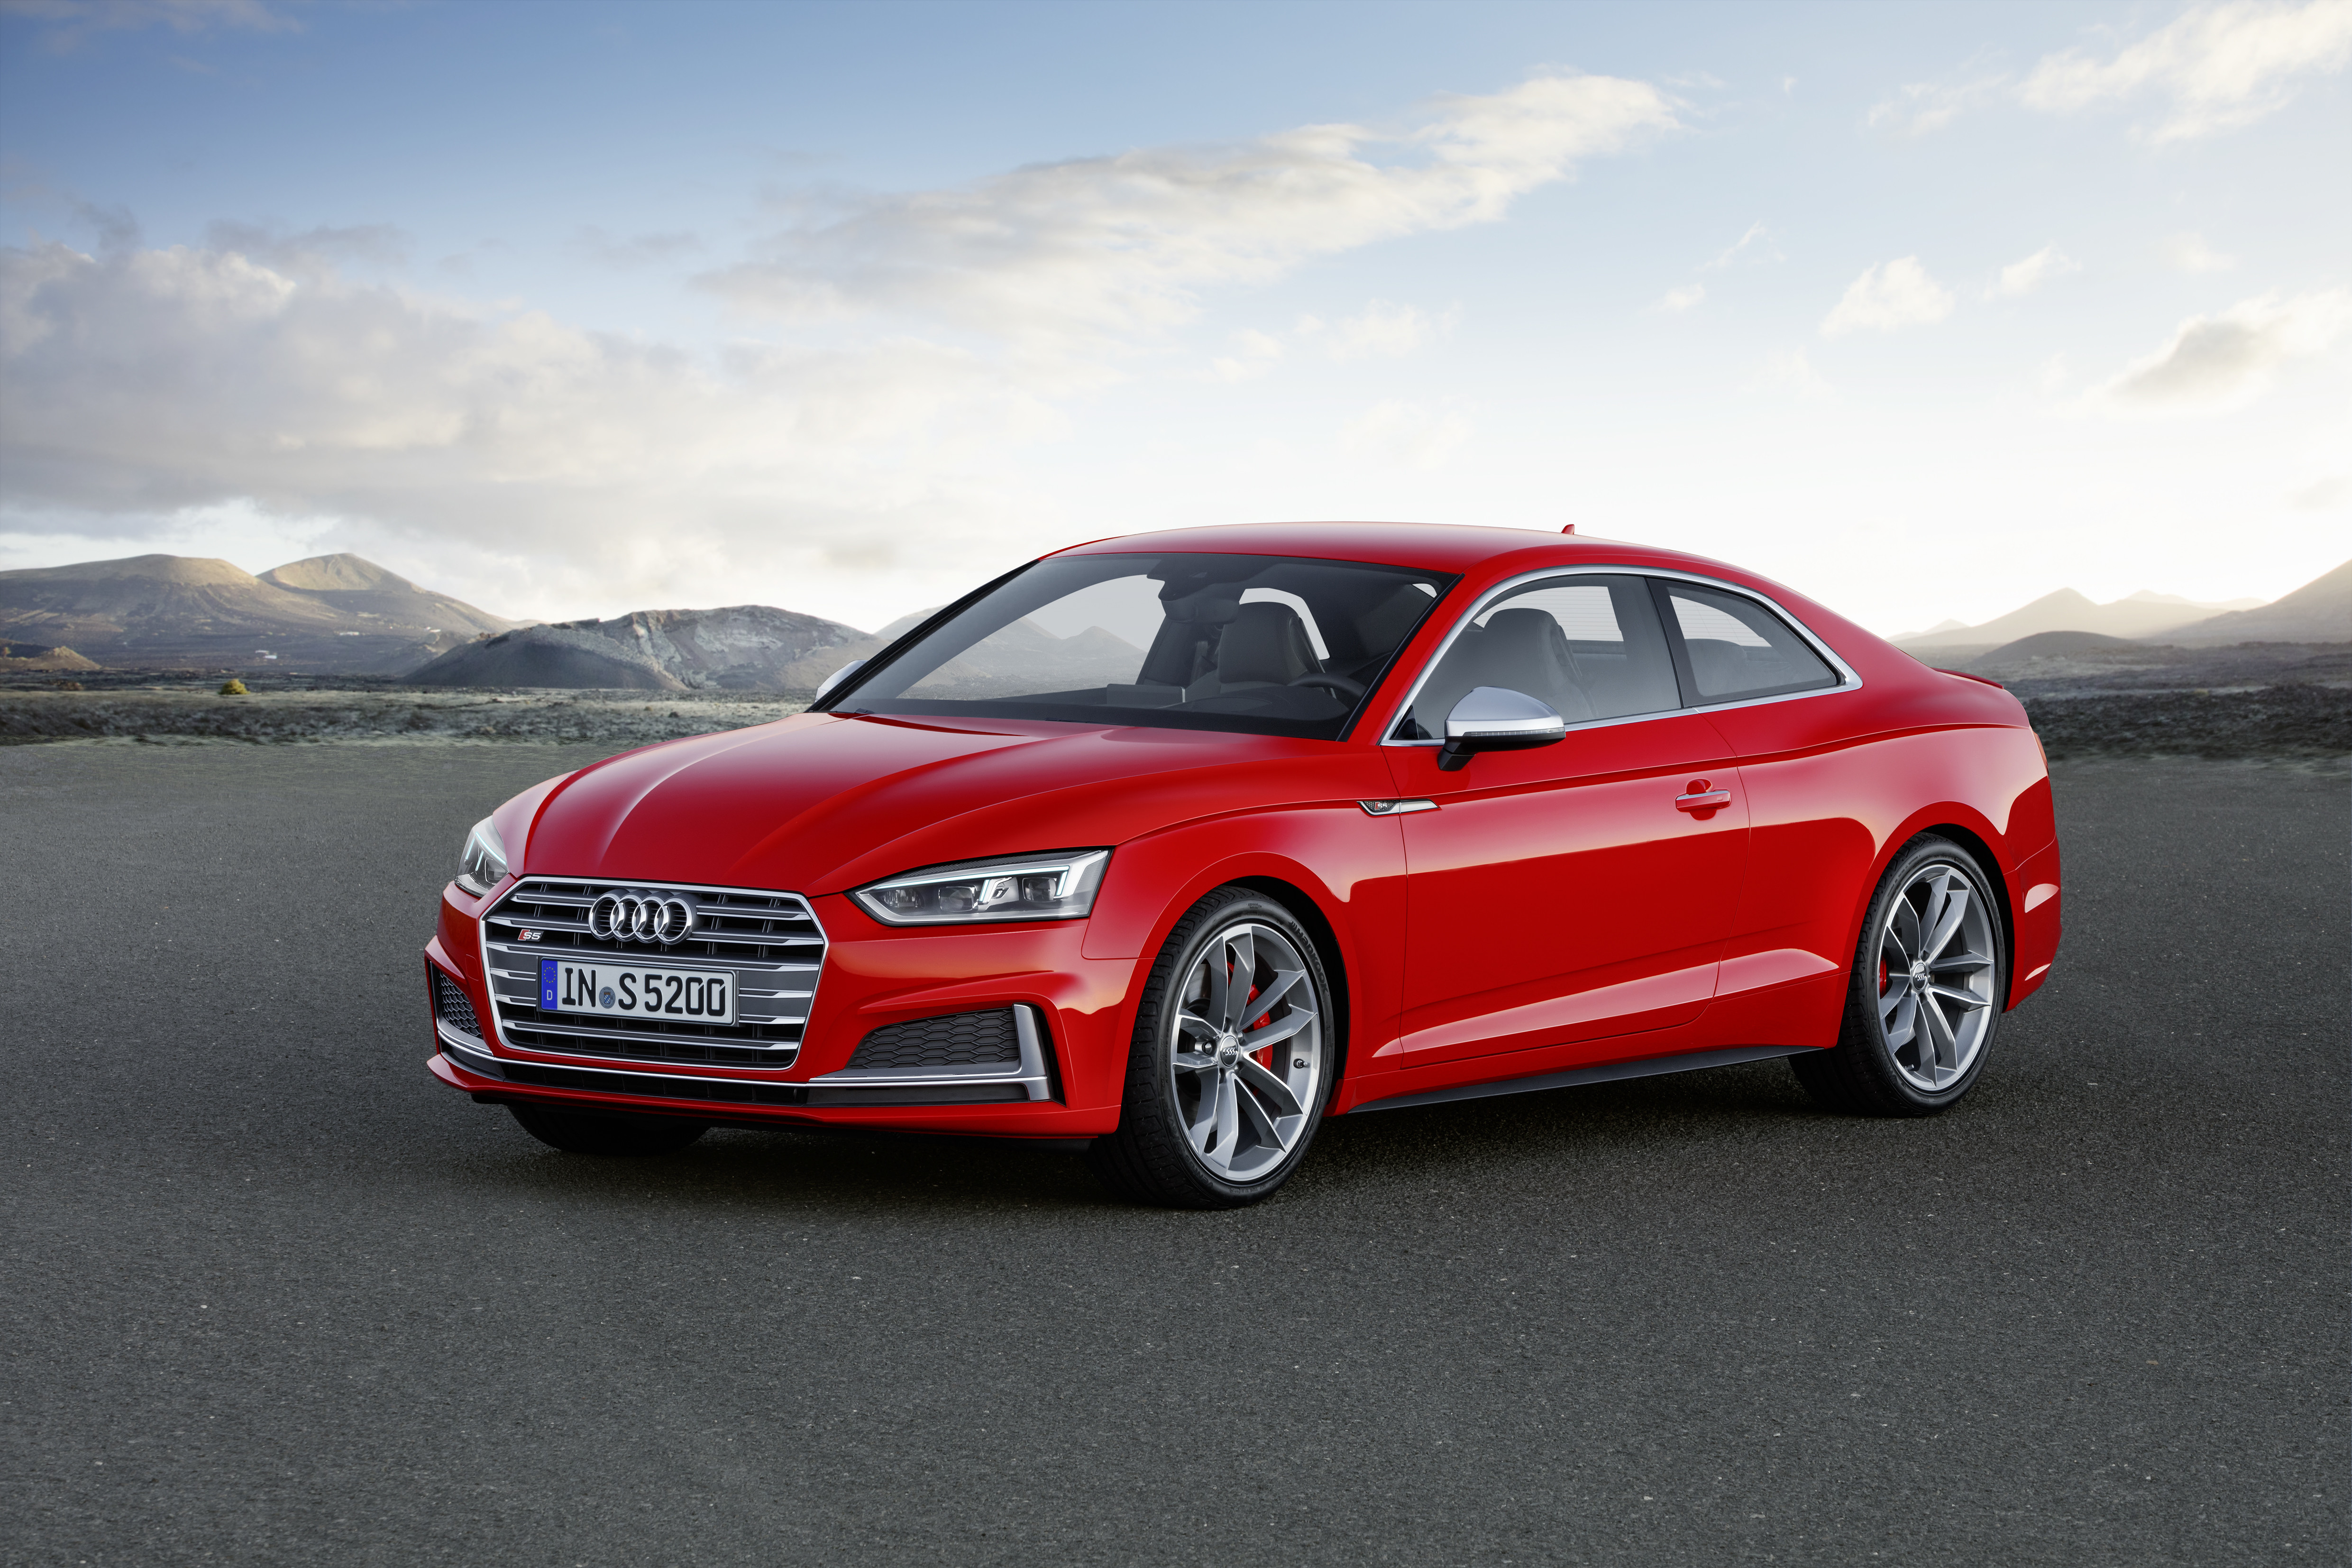 Audi S5 Coupe exterior specifications